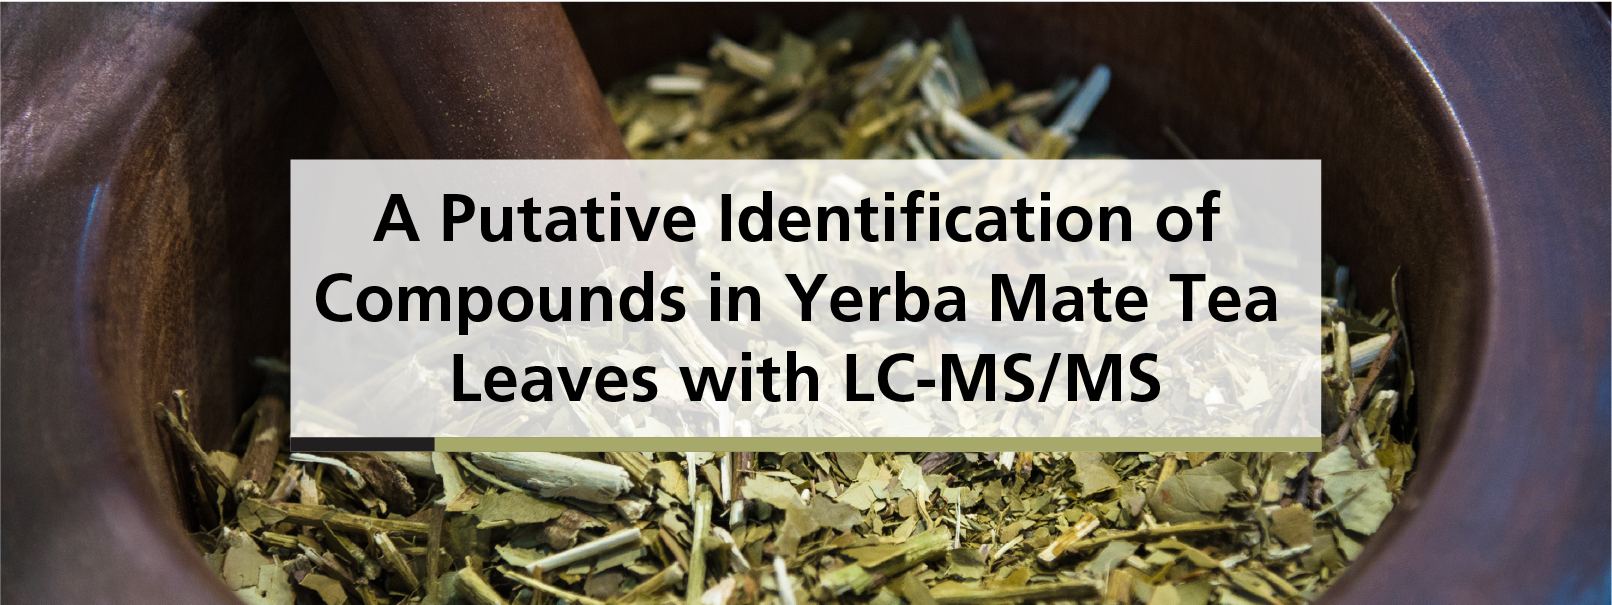 A Putative Identification of Compounds in Yerba Mate Tea Leaves with LC-MS/MS